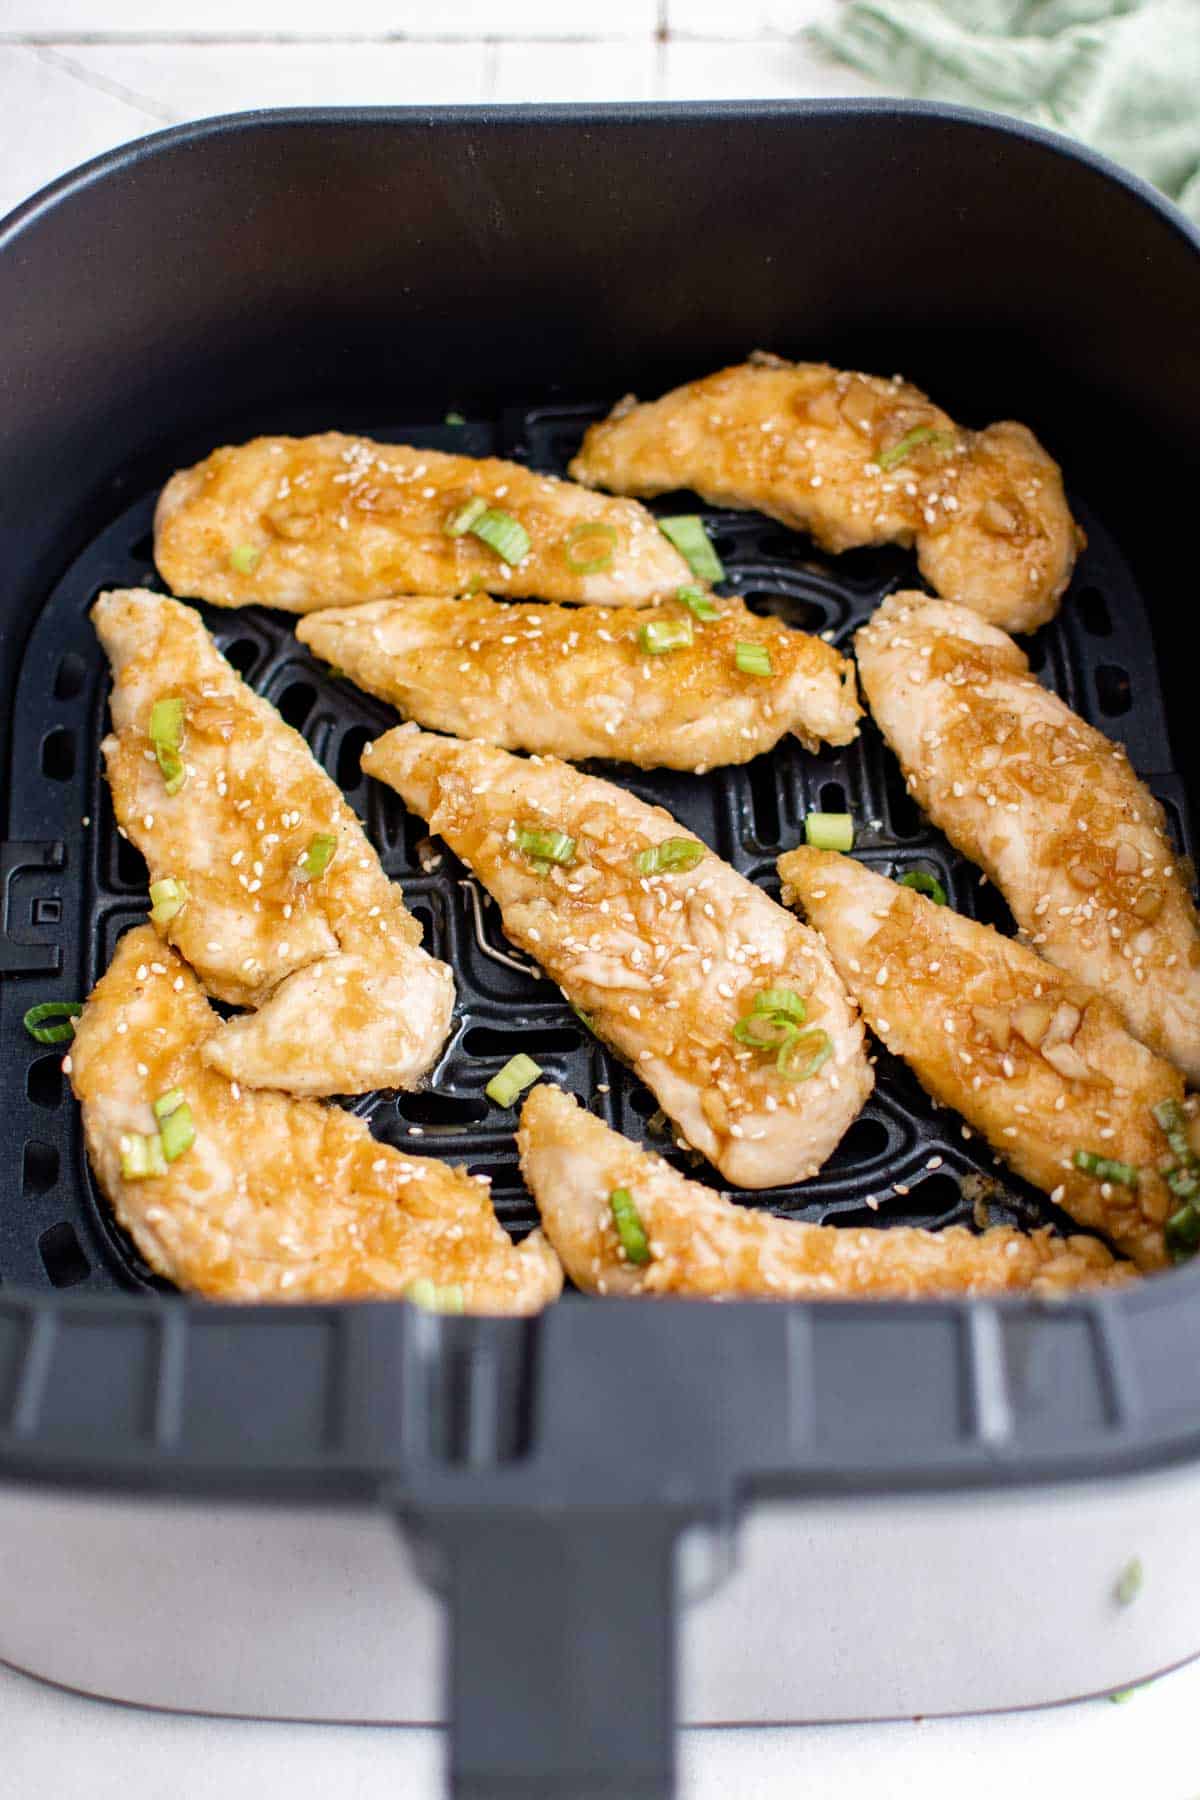 cooked chickebn tenders inside the air fryer basket